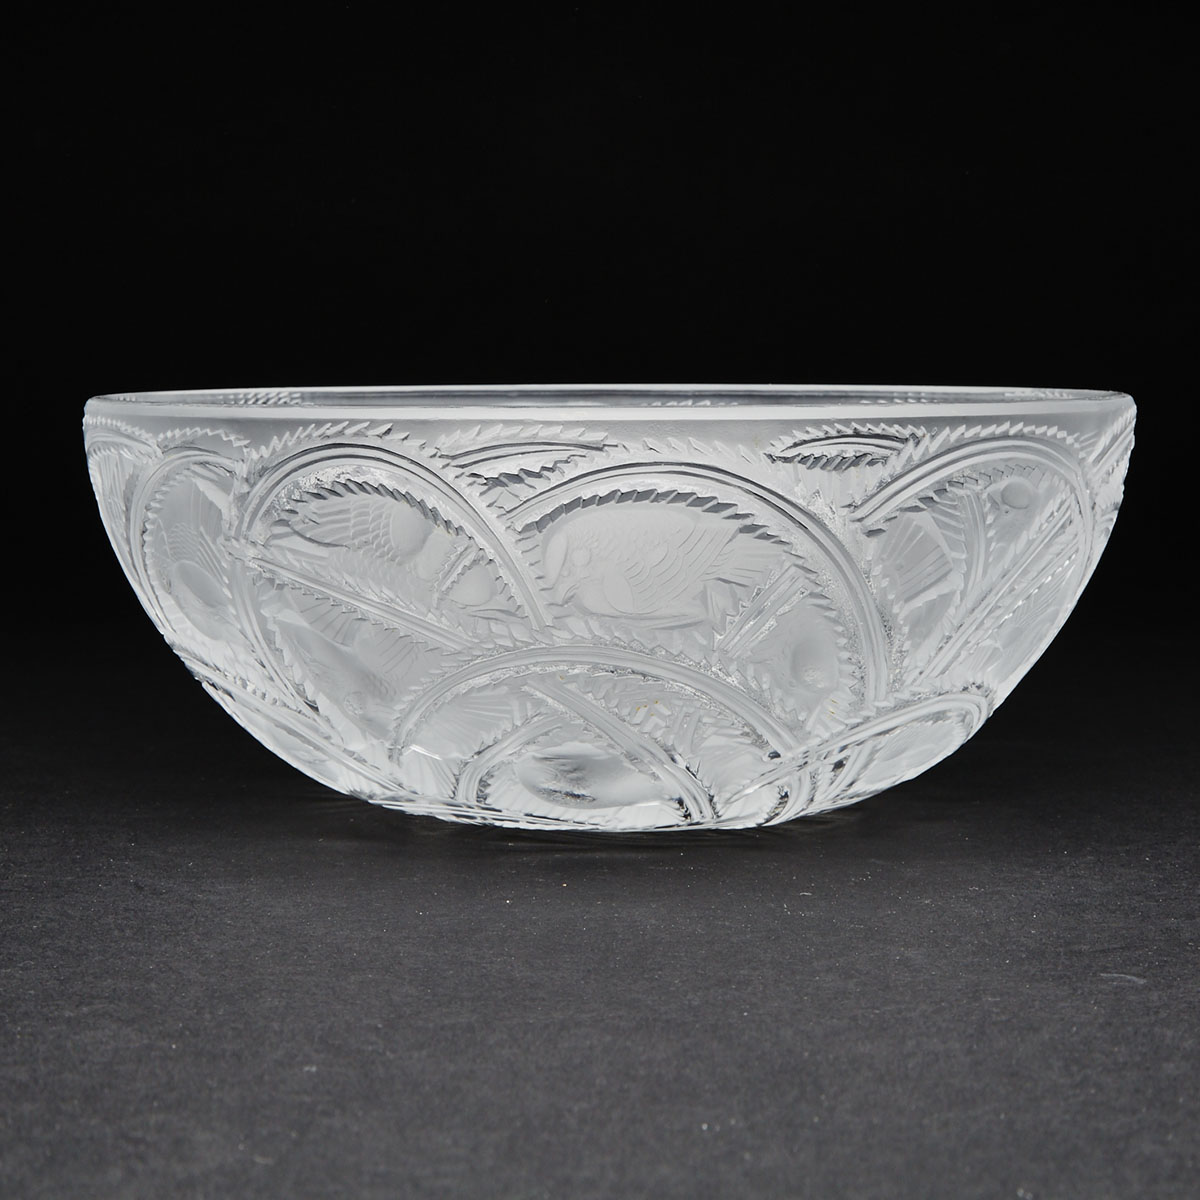 ‘Pinsons’, Lalique Moulded and Partly Frosted Glass Bowl, post-1945